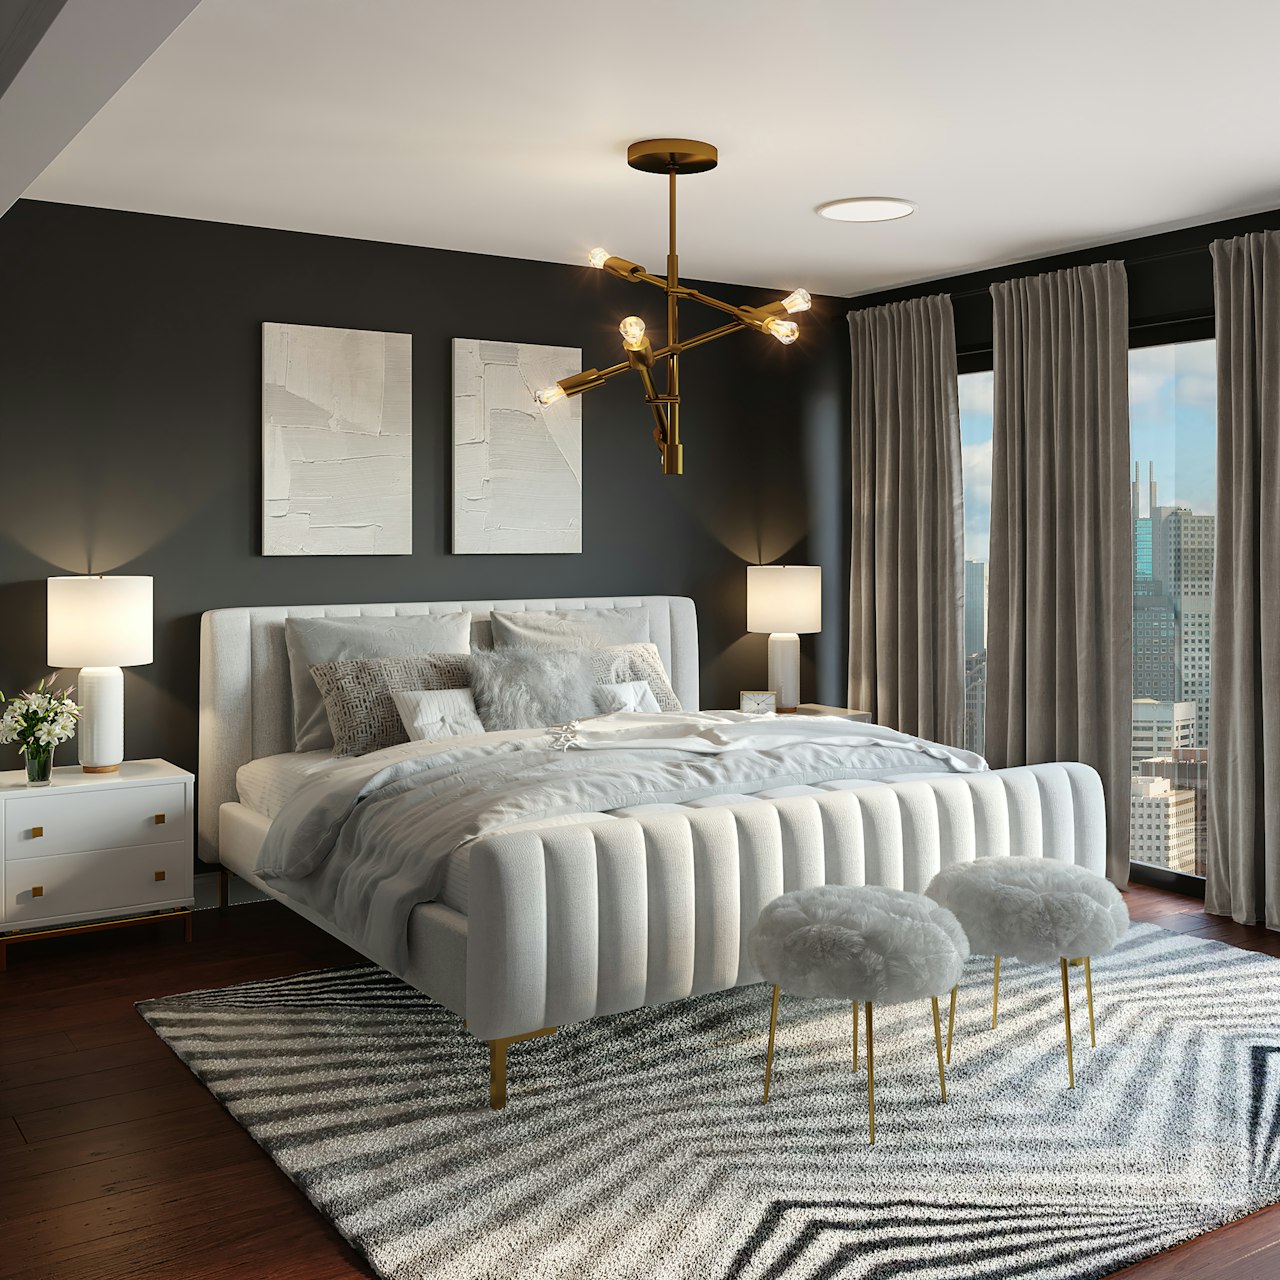 Bedroom Staging Can Fulfill Buyer Dreams